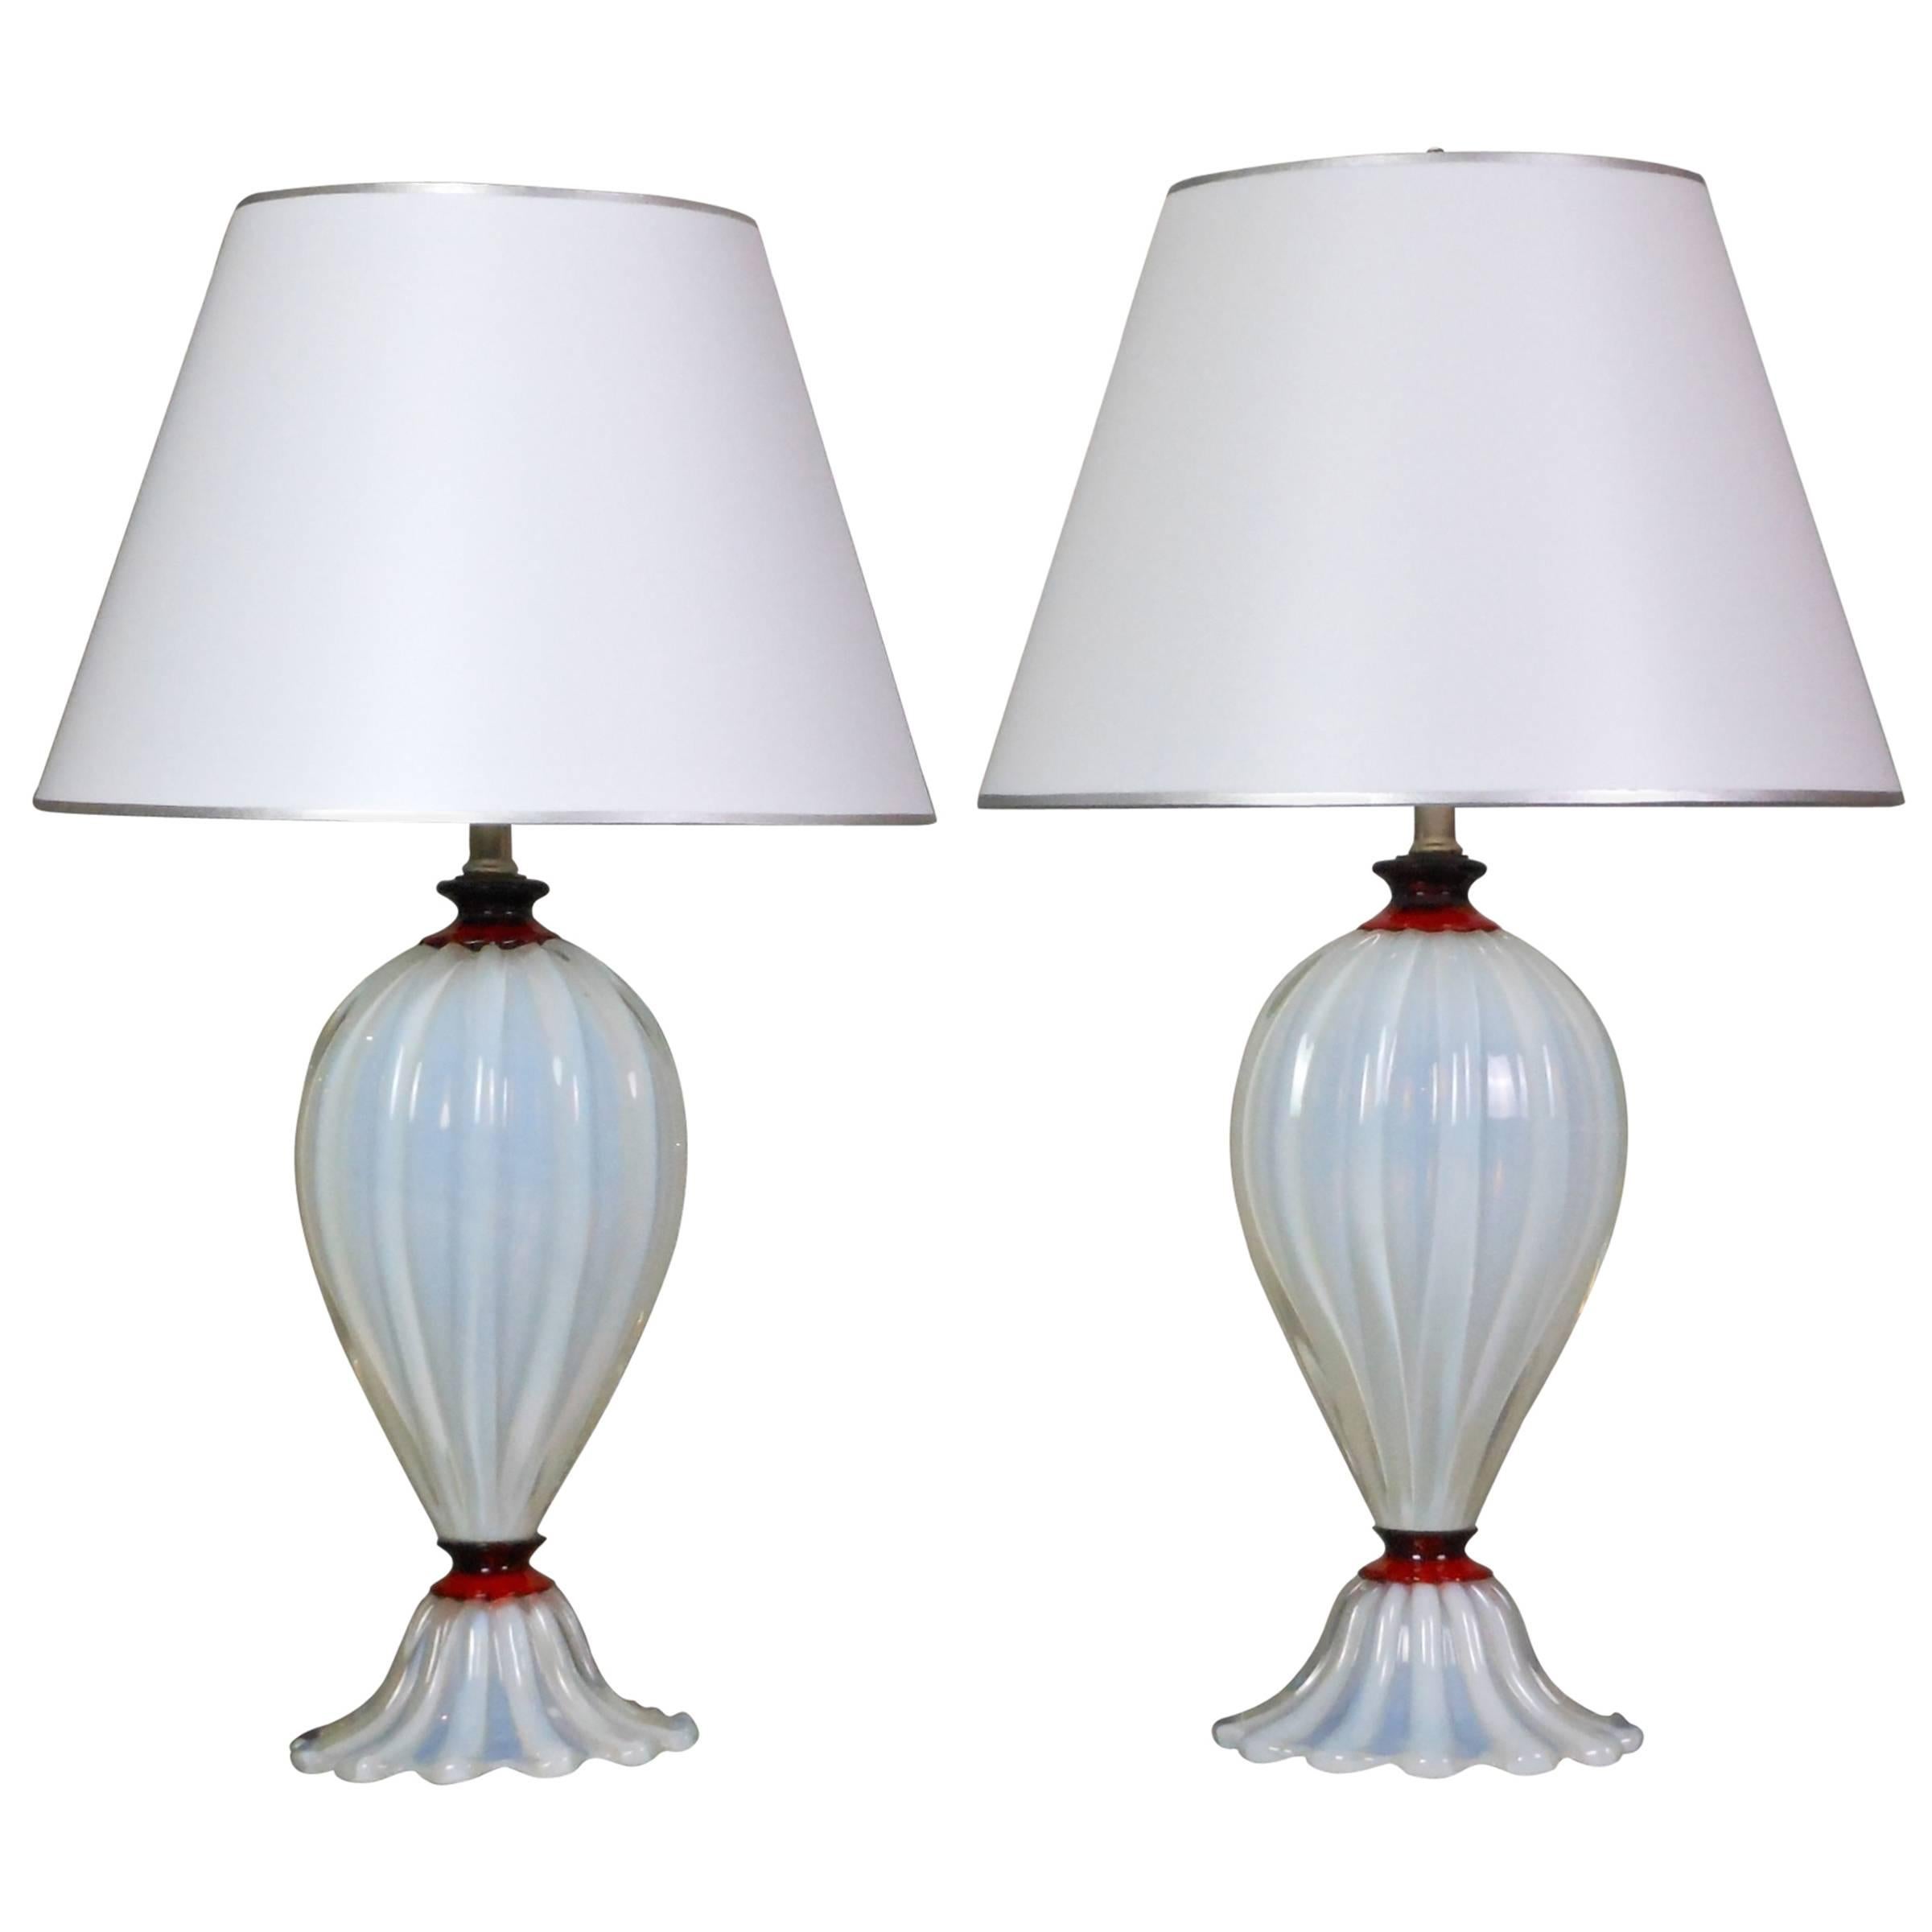 A Pair of Murano White Opaline and Ruby Red Glass Lamps For Sale